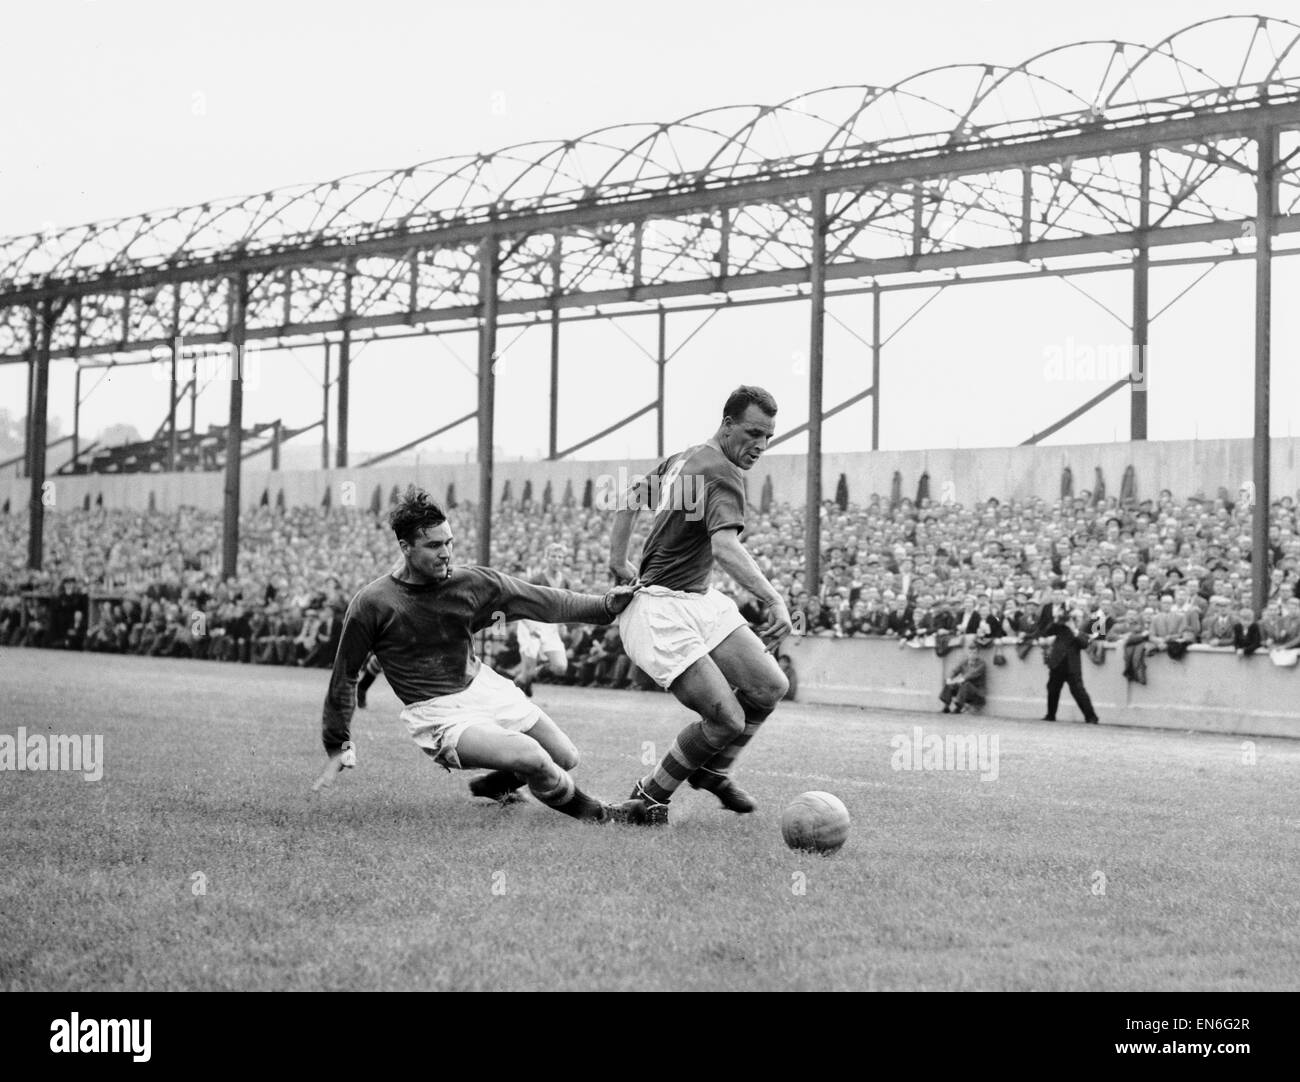 English League Division One match at Elland Road. Leeds United 1 v Aston Villa 0. Leeds' John Charles challenged for the ball. 22nd September 1956. Stock Photo